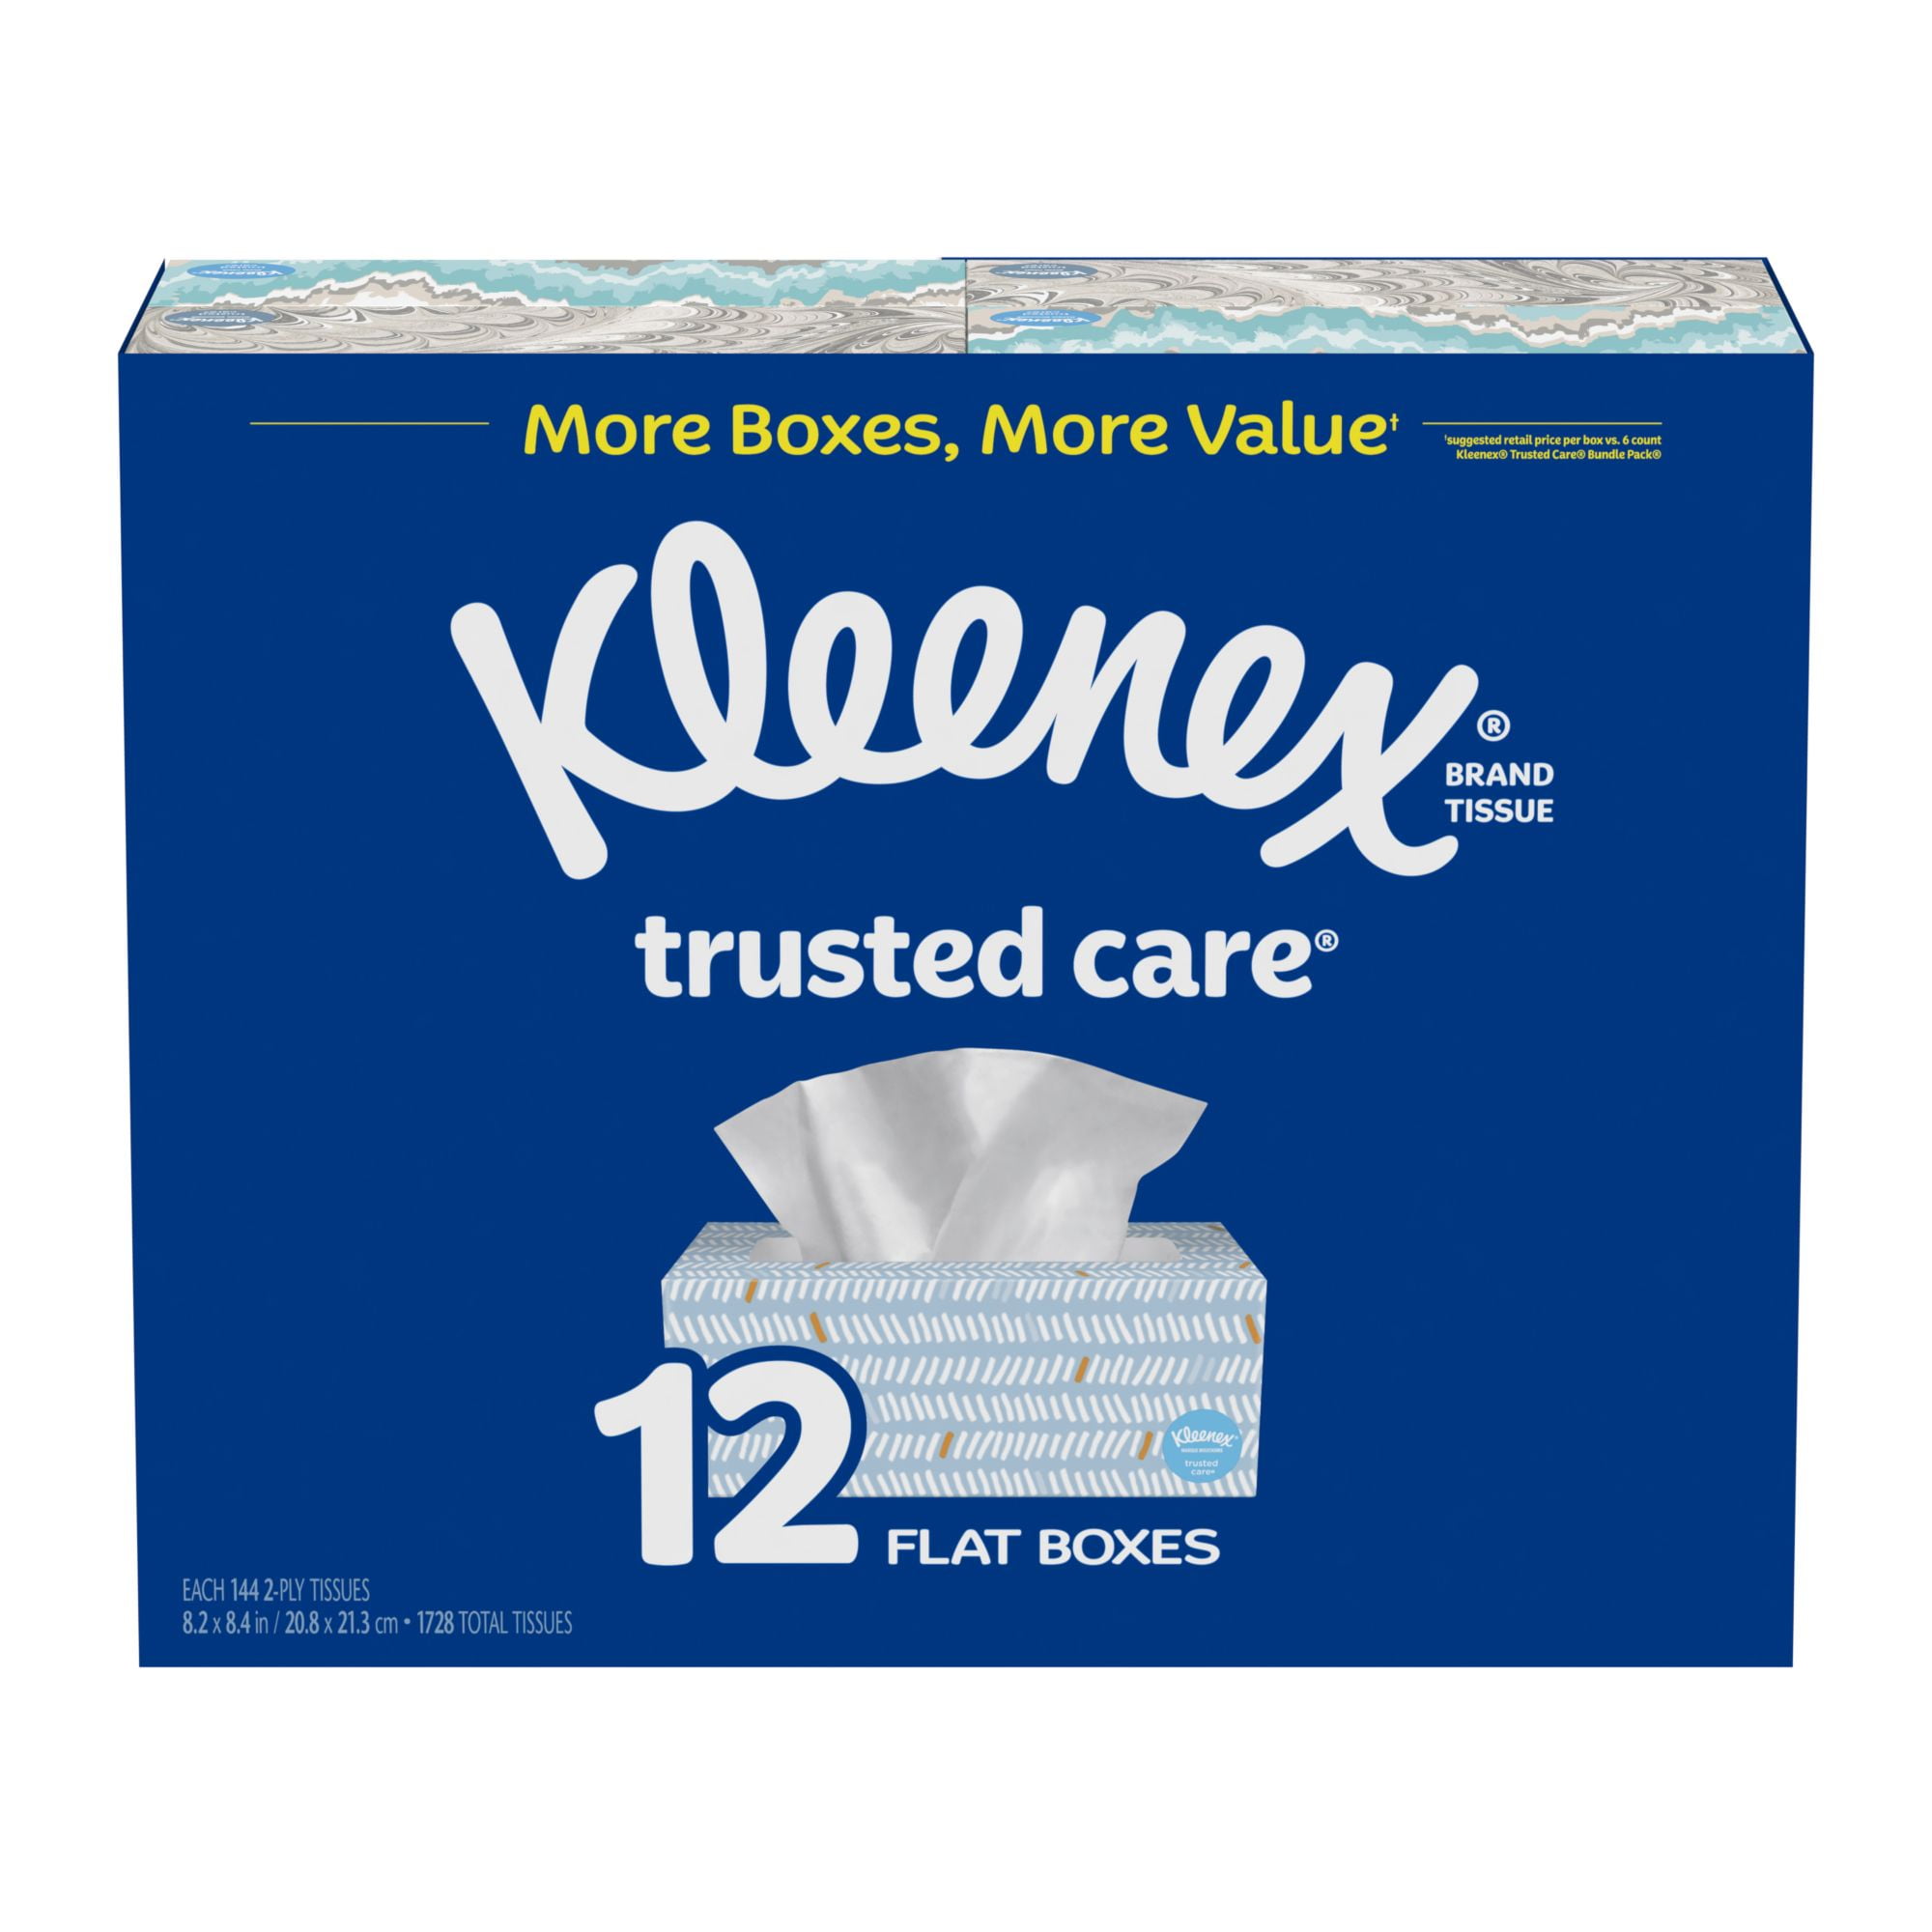 420 Count Total 420 Tissues 6 Flat Boxes 1 Pack 6 Flat Boxes Kleenex Ultra Soft Facial Tissues 70 Tissues per Box